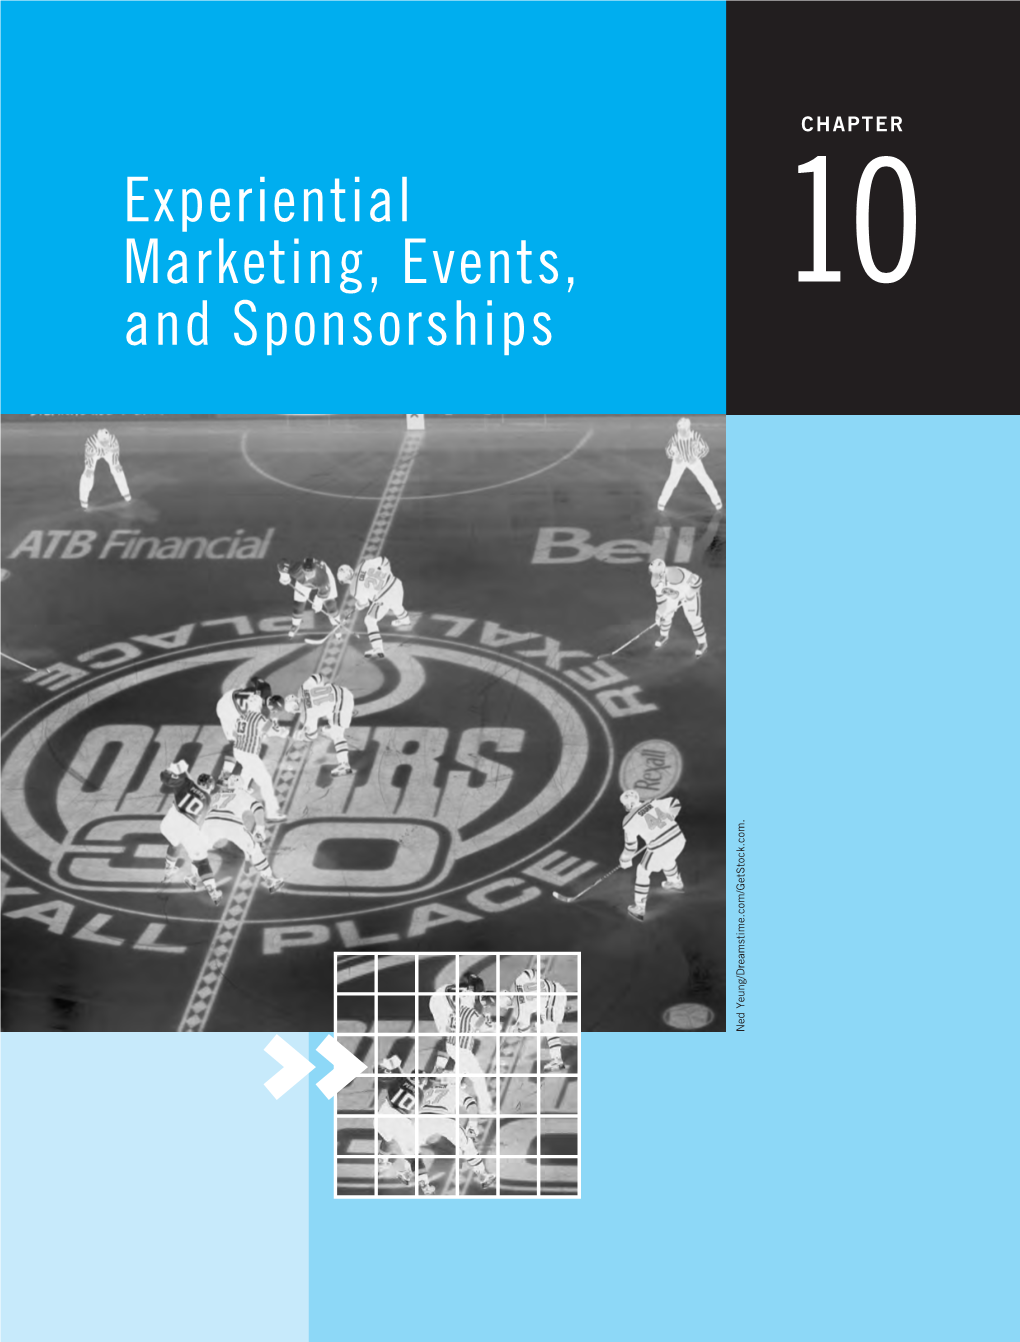 Experiential Marketing, Events, and Sponsorships, and Shows How a Variety of Companies Reap the Benefits of These Forms of Marketing Communications